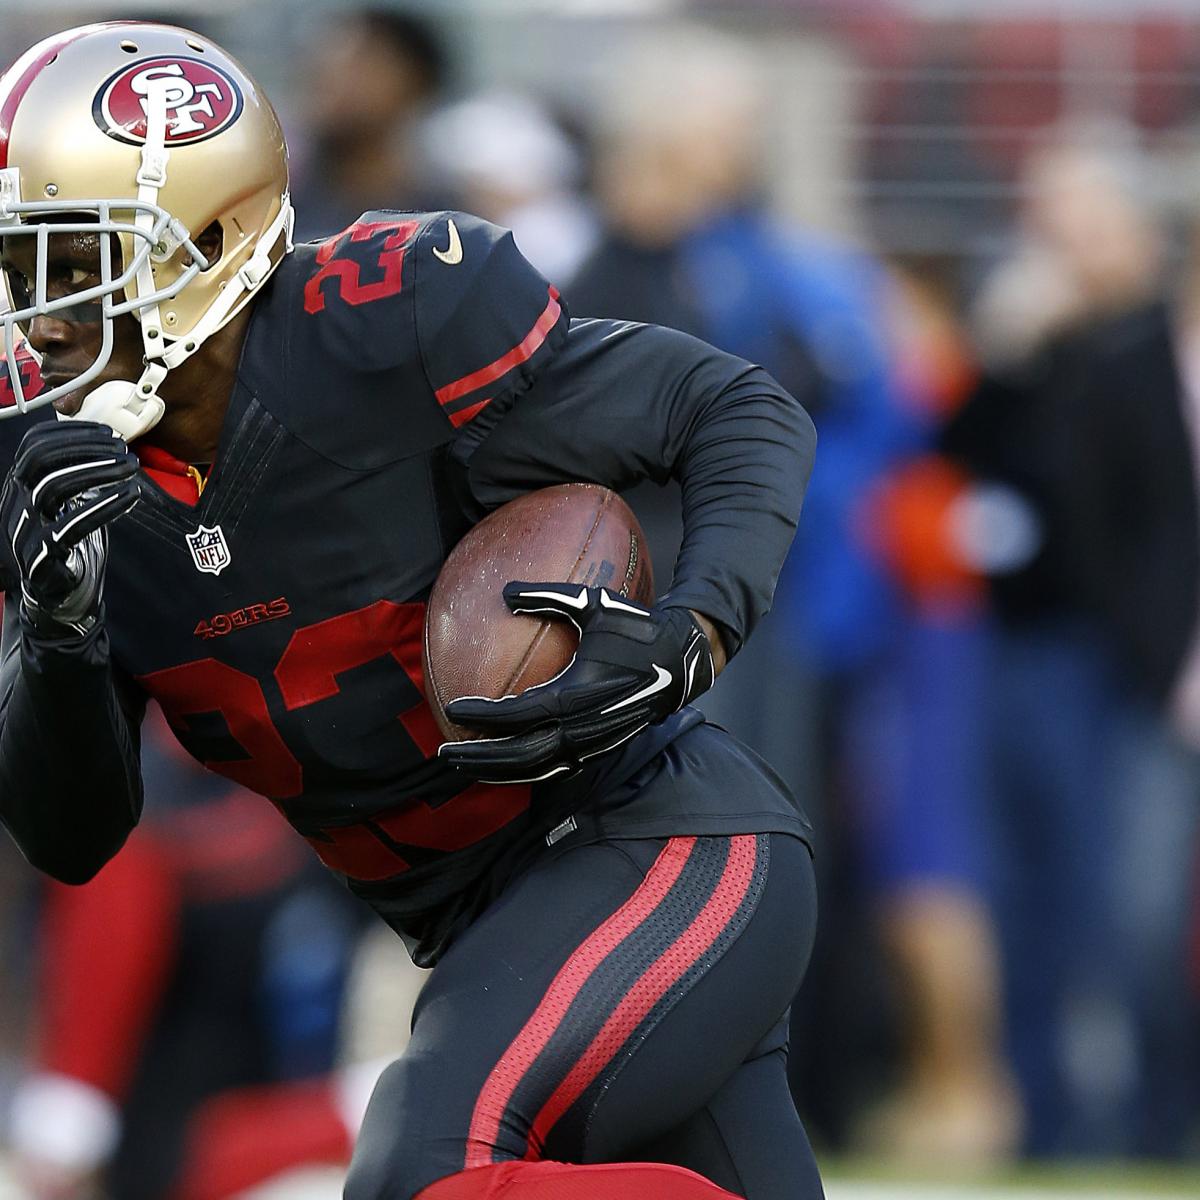 49ers' Thursday Night Football Color Rush uniforms will reportedly